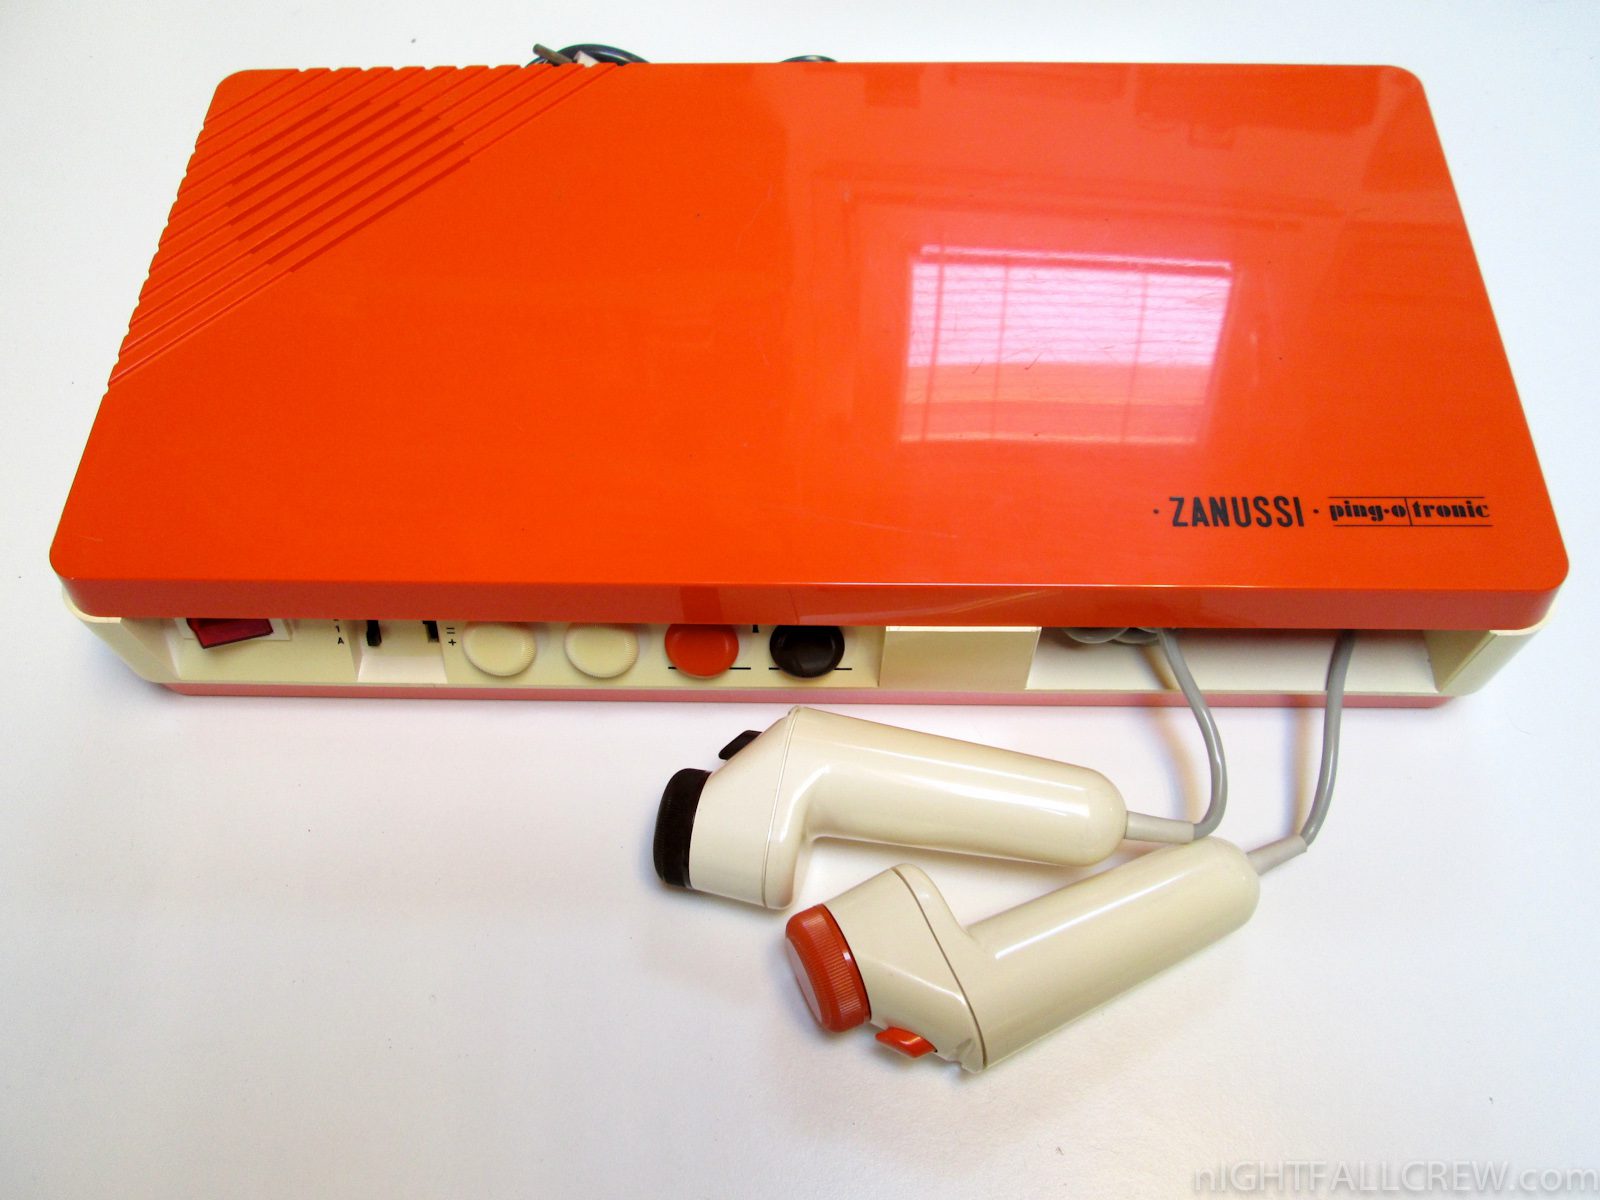 5 Video Game Consoles That Never Came To The U.S.